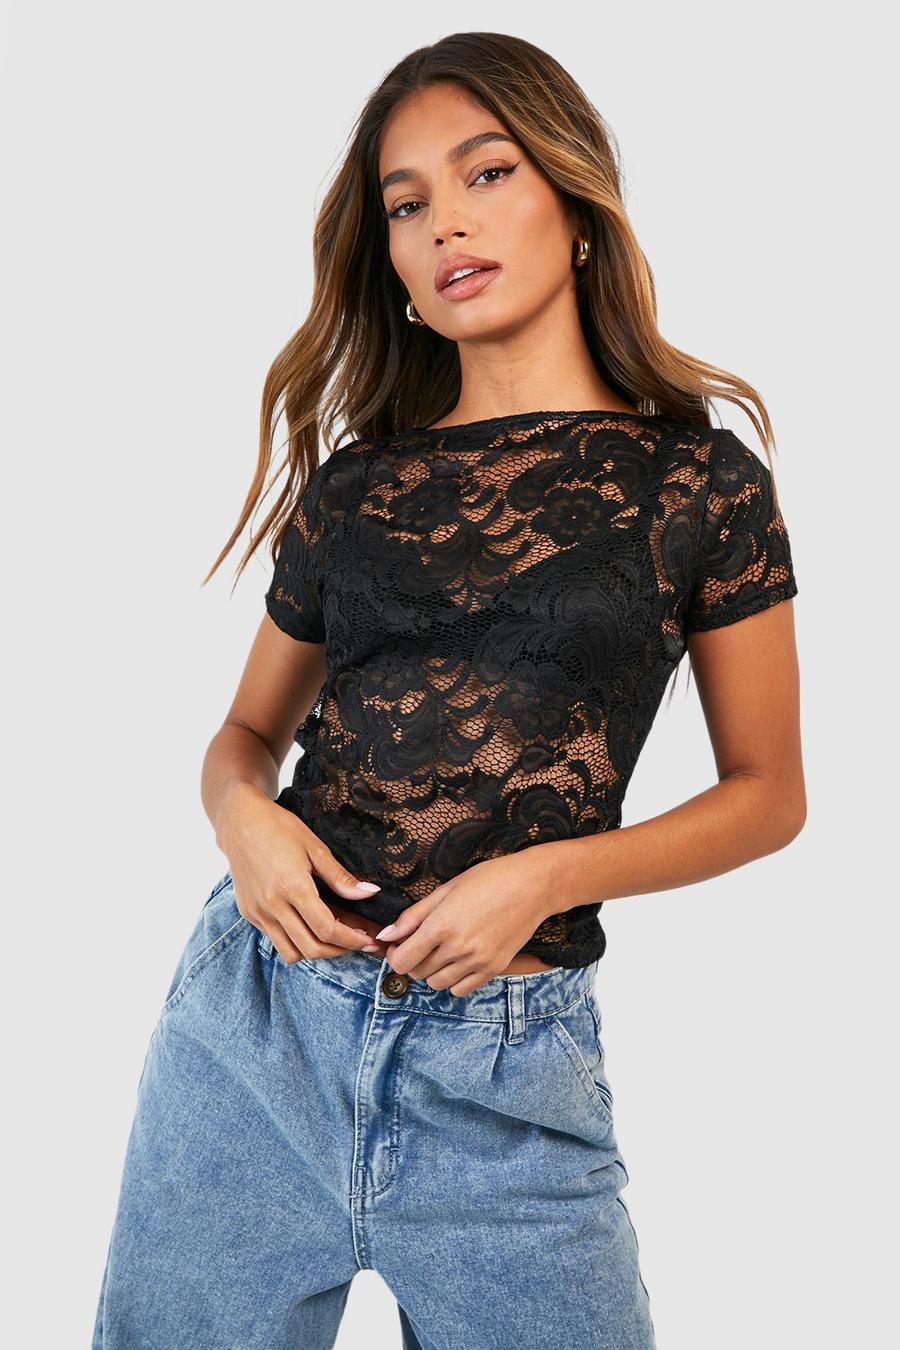 Lace Tops | Lace Crop Tops | boohoo UK